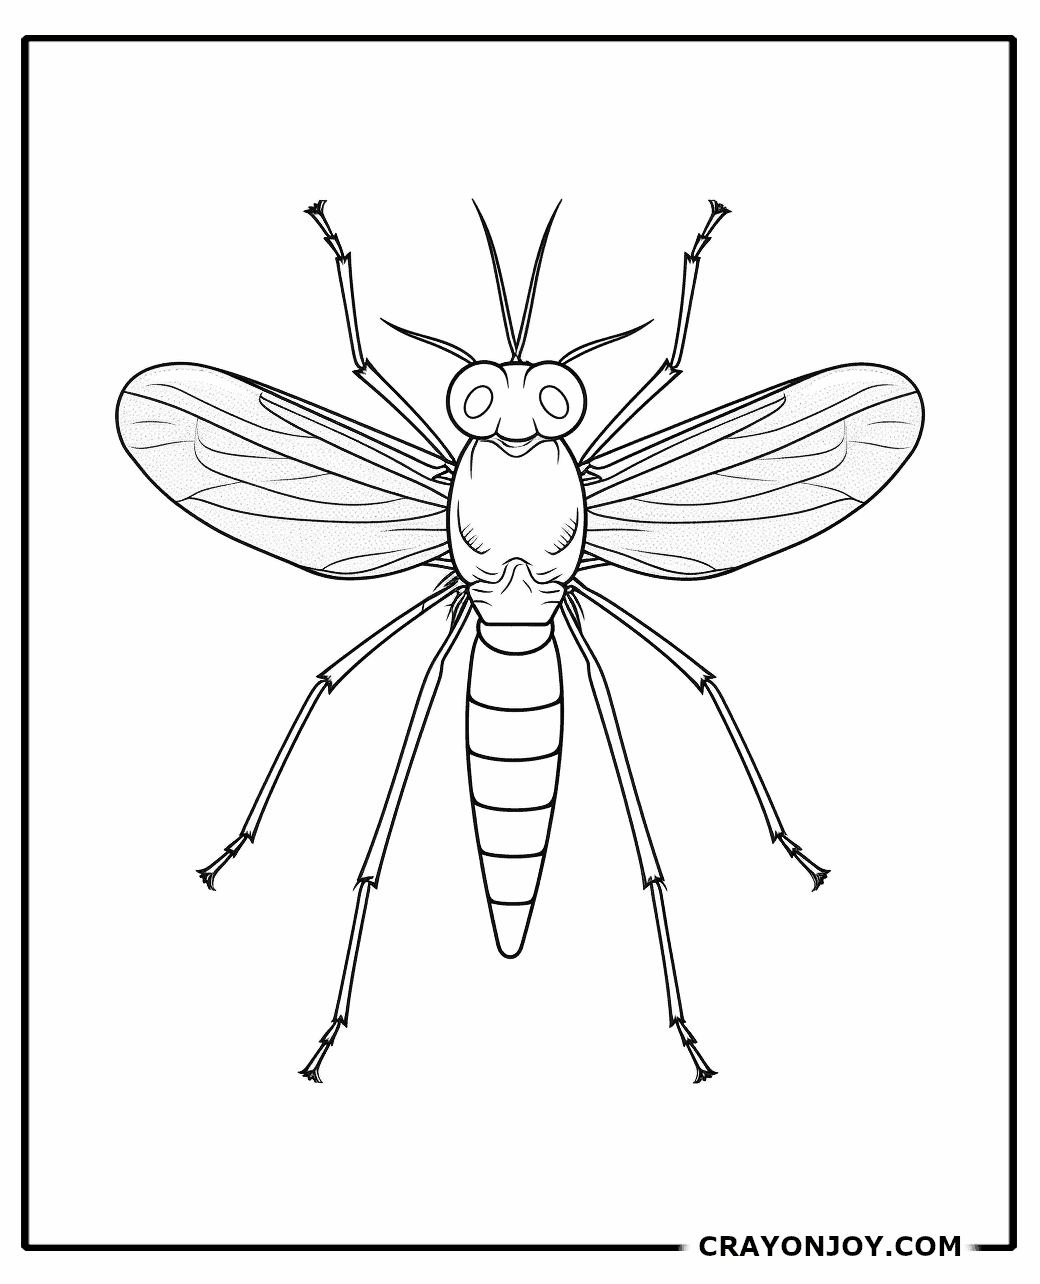 Free Printable Mosquito Coloring Pages for Kids & Adults